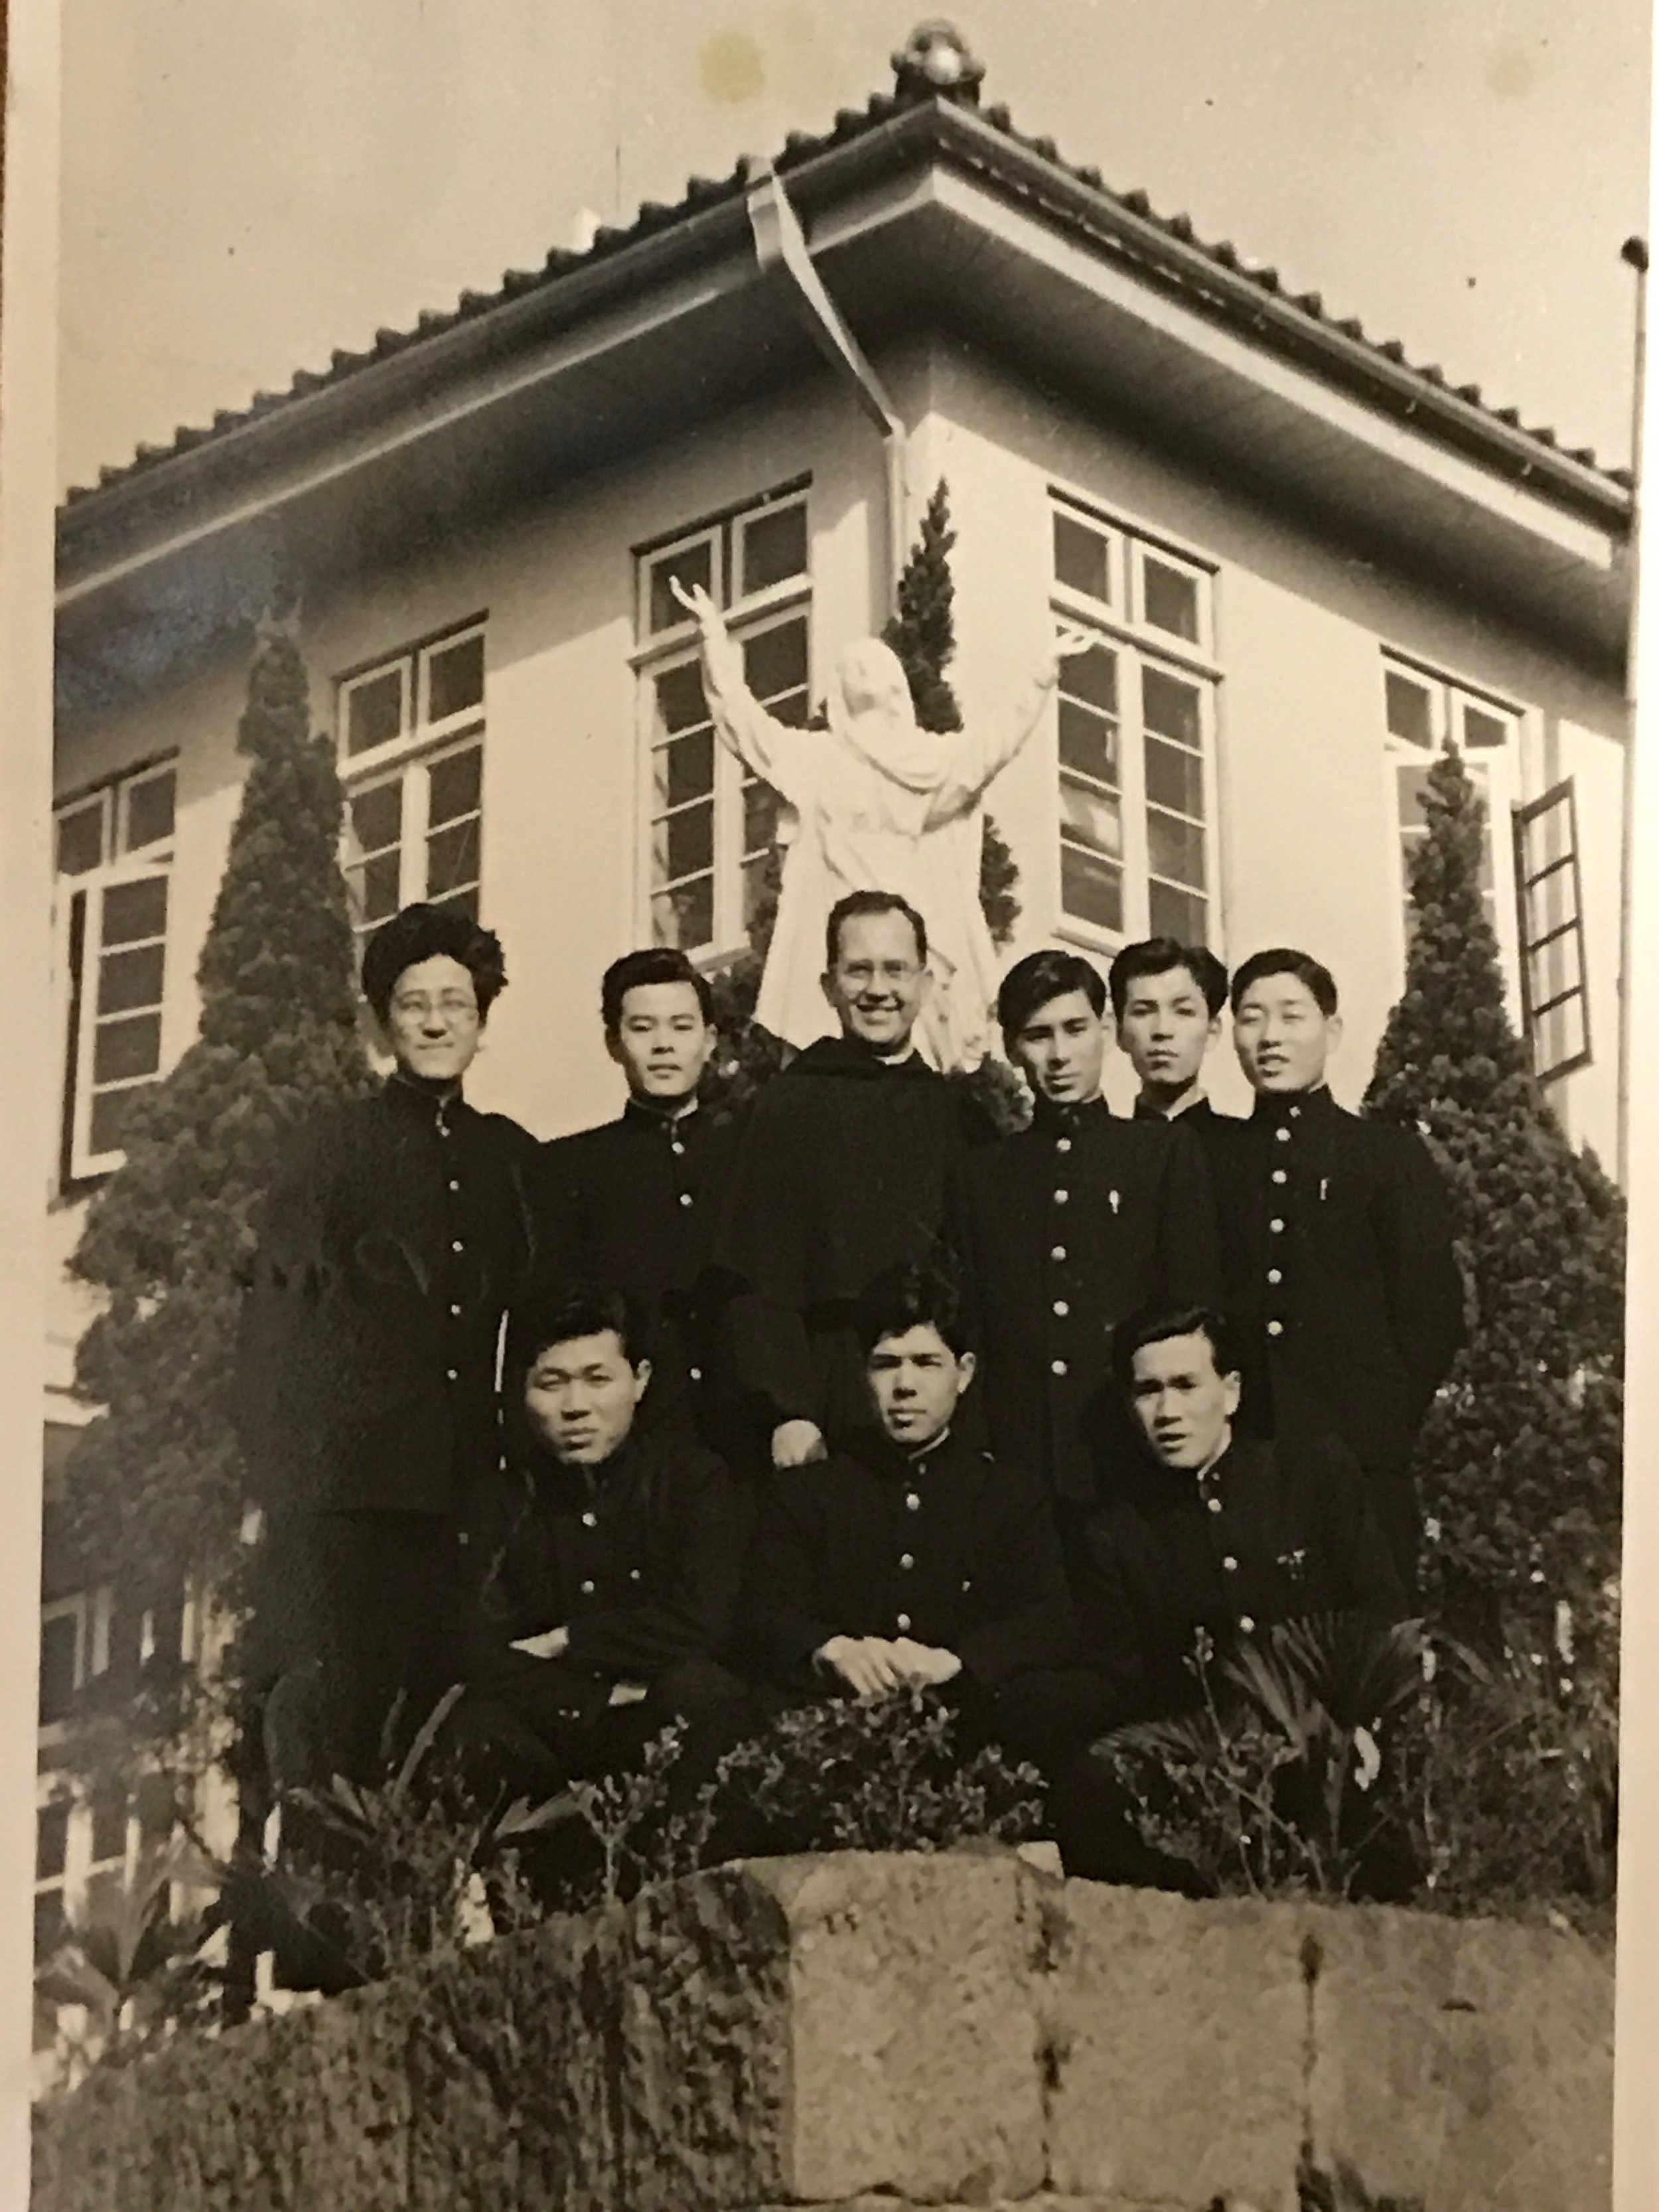 Father Krupa in front of the Hostel on the Nagasaki property that housed college students.